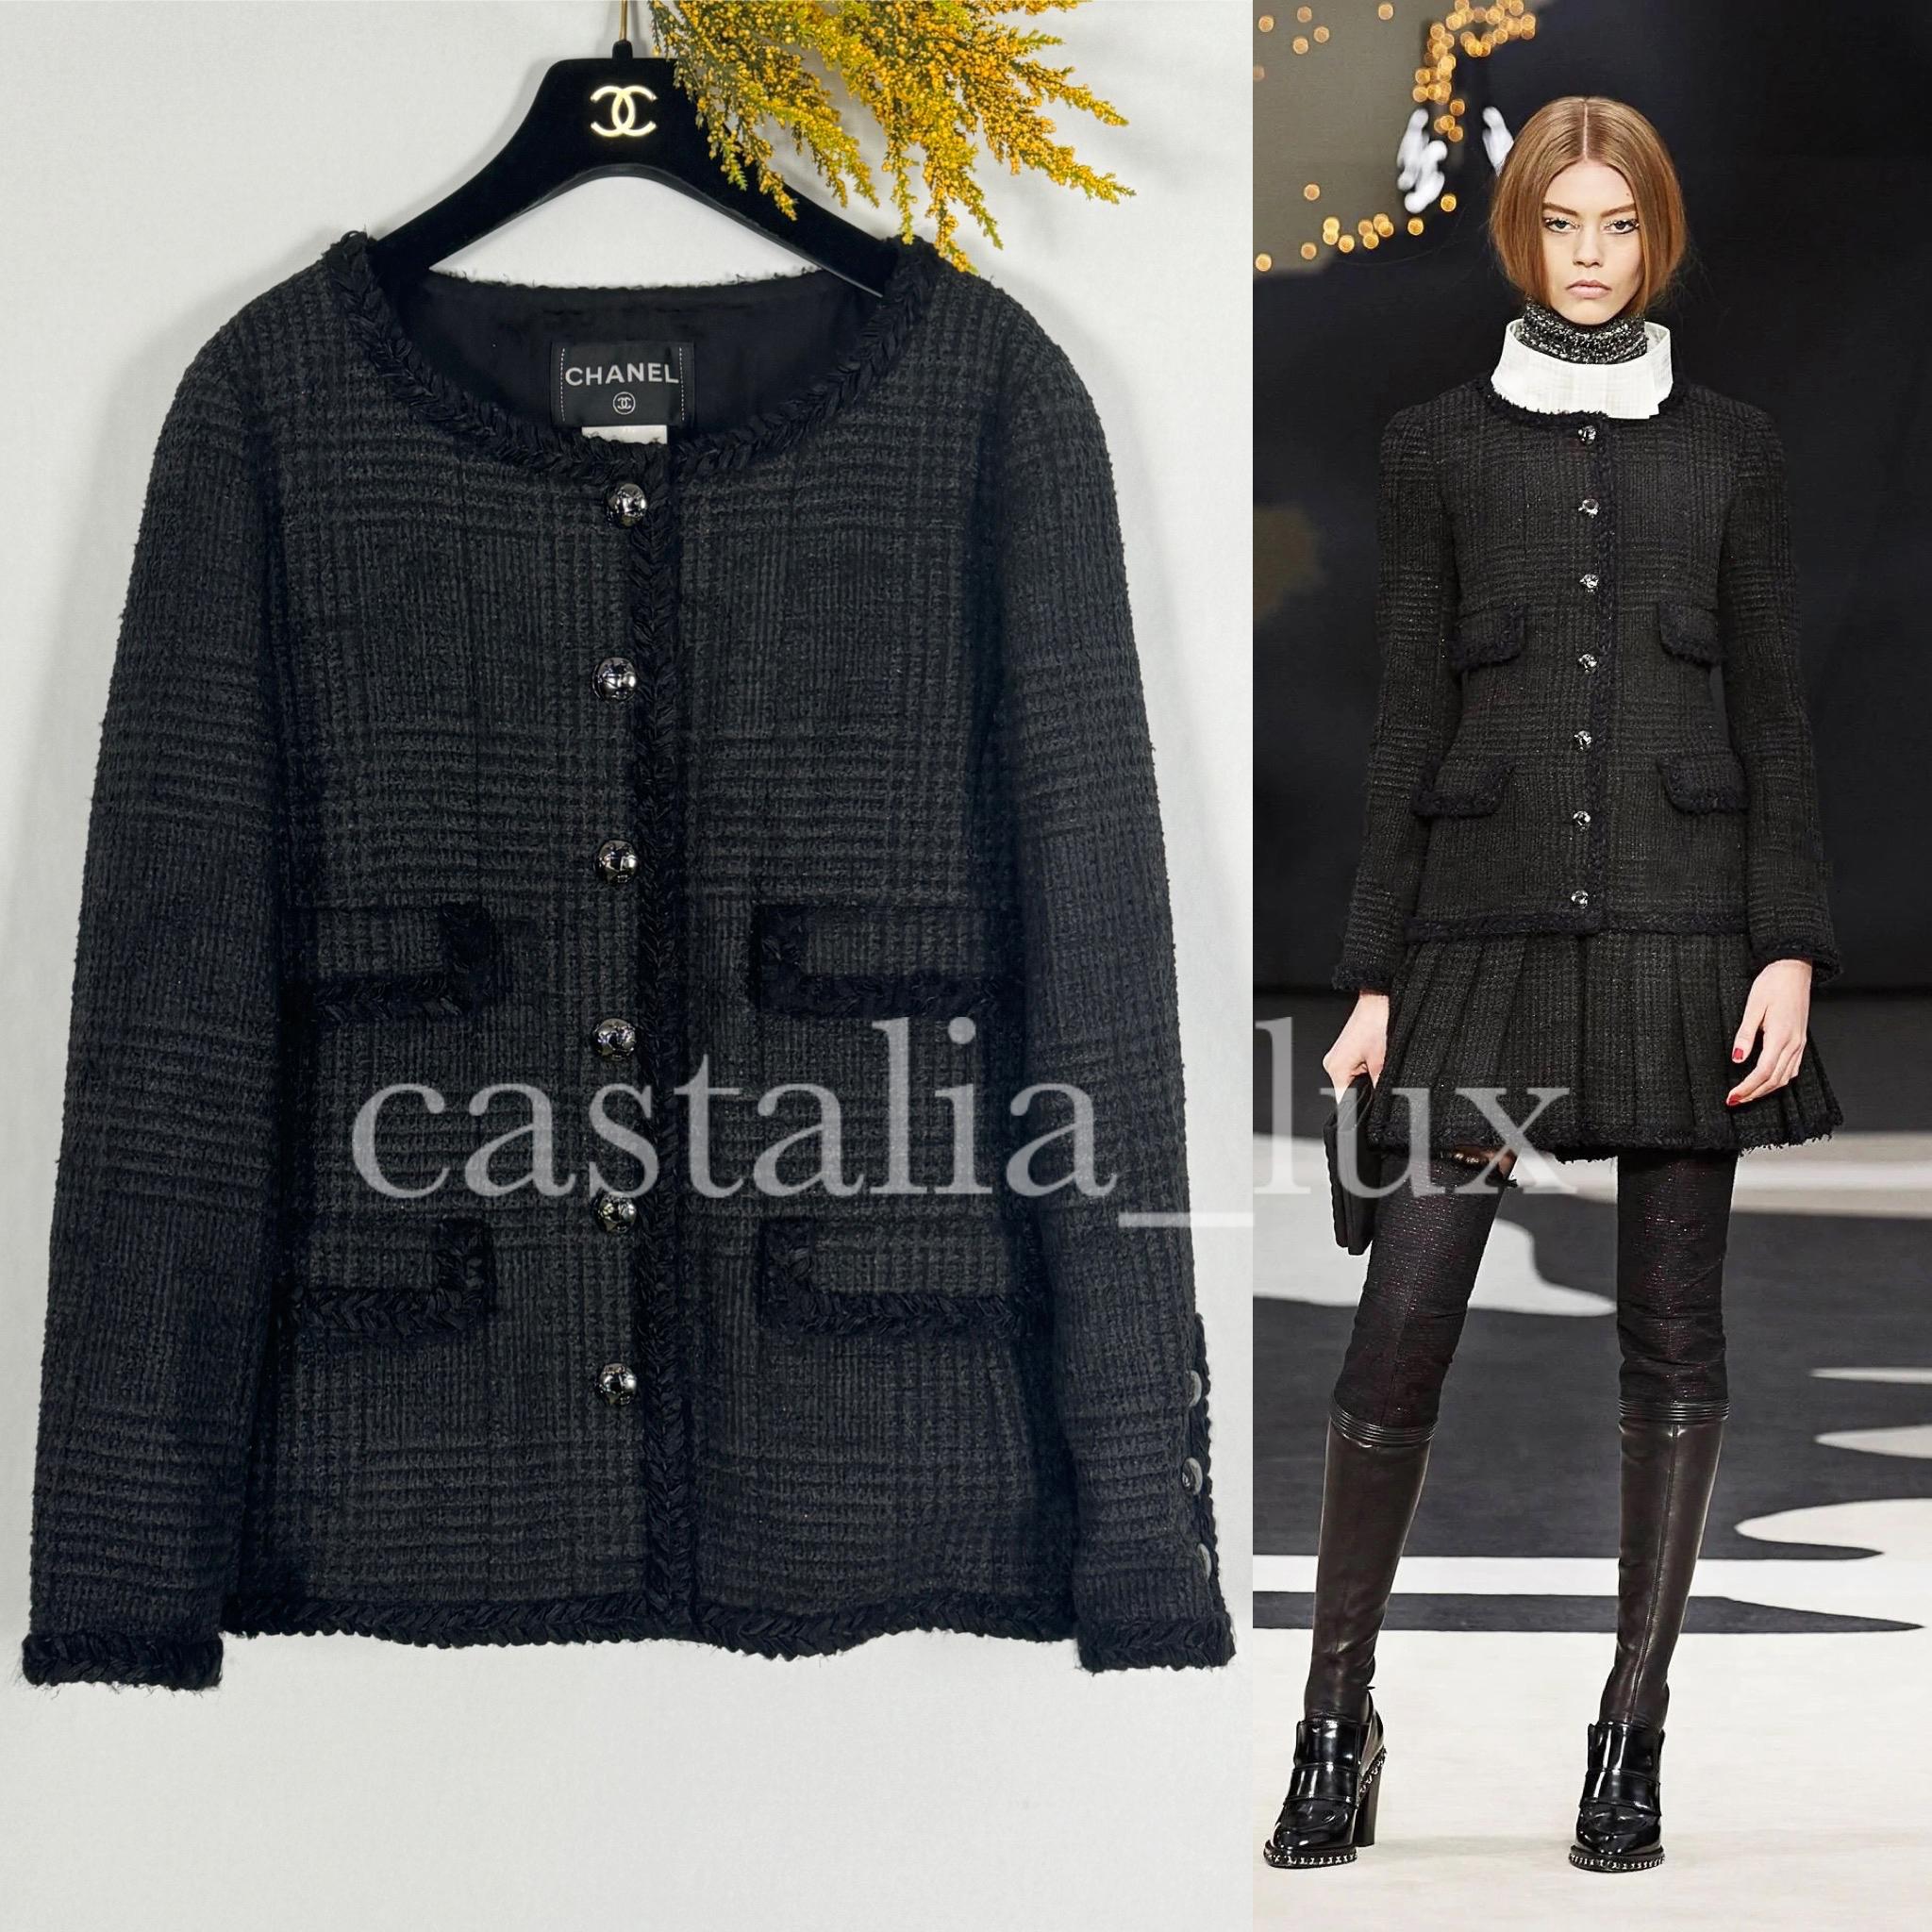 One of the most iconic Chanel black jackets of all times -- from Runway of GLOBALIZATION Collection by Karl Lagerfeld, 2013 Fall
Size mark 42 FR. Never worn.
- As seen on Kira Knightley and in many magazines!
- CC logo 'Globe' buttons
- ! stunning